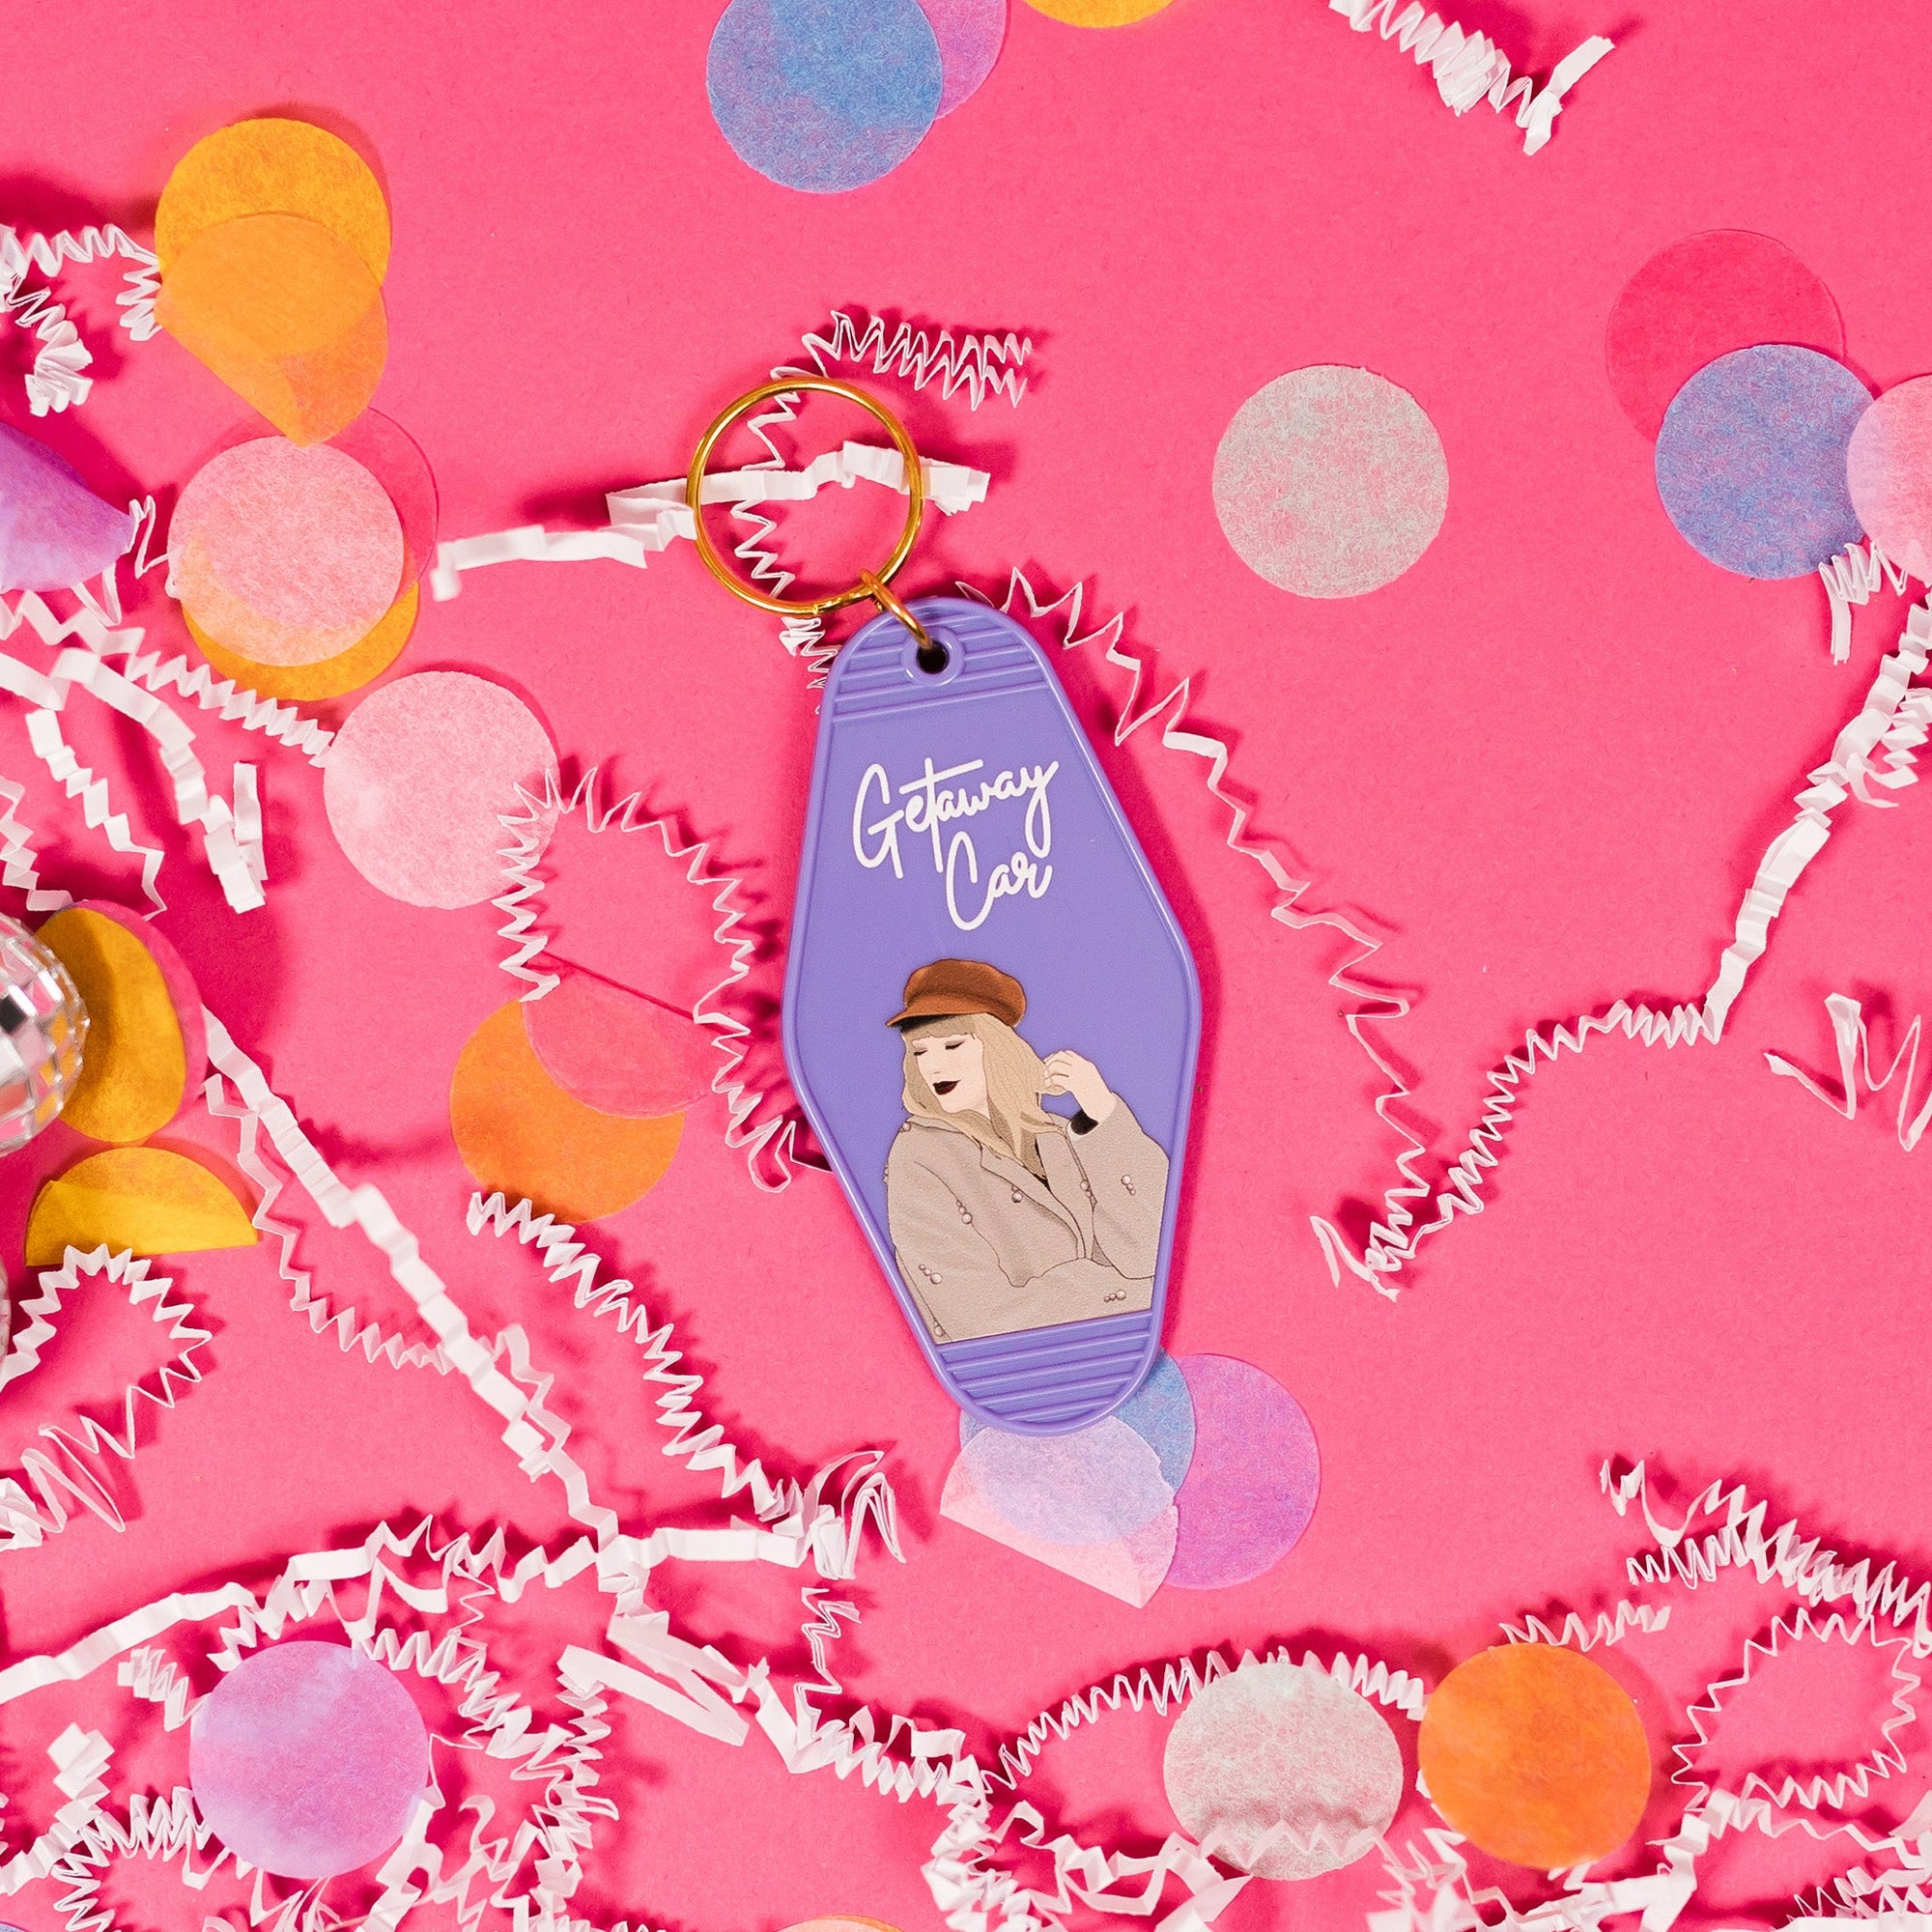 On a hot pink background sits a keychain with white crinkle and big, colorful confetti scattered around. There are mini disco balls. This Taylor Swift inspired vintage, motel keychain is lavender with an illustration of Taylor Swift wearing a hat and coat. In a white, handwritten lettering script it says "Getaway Car".